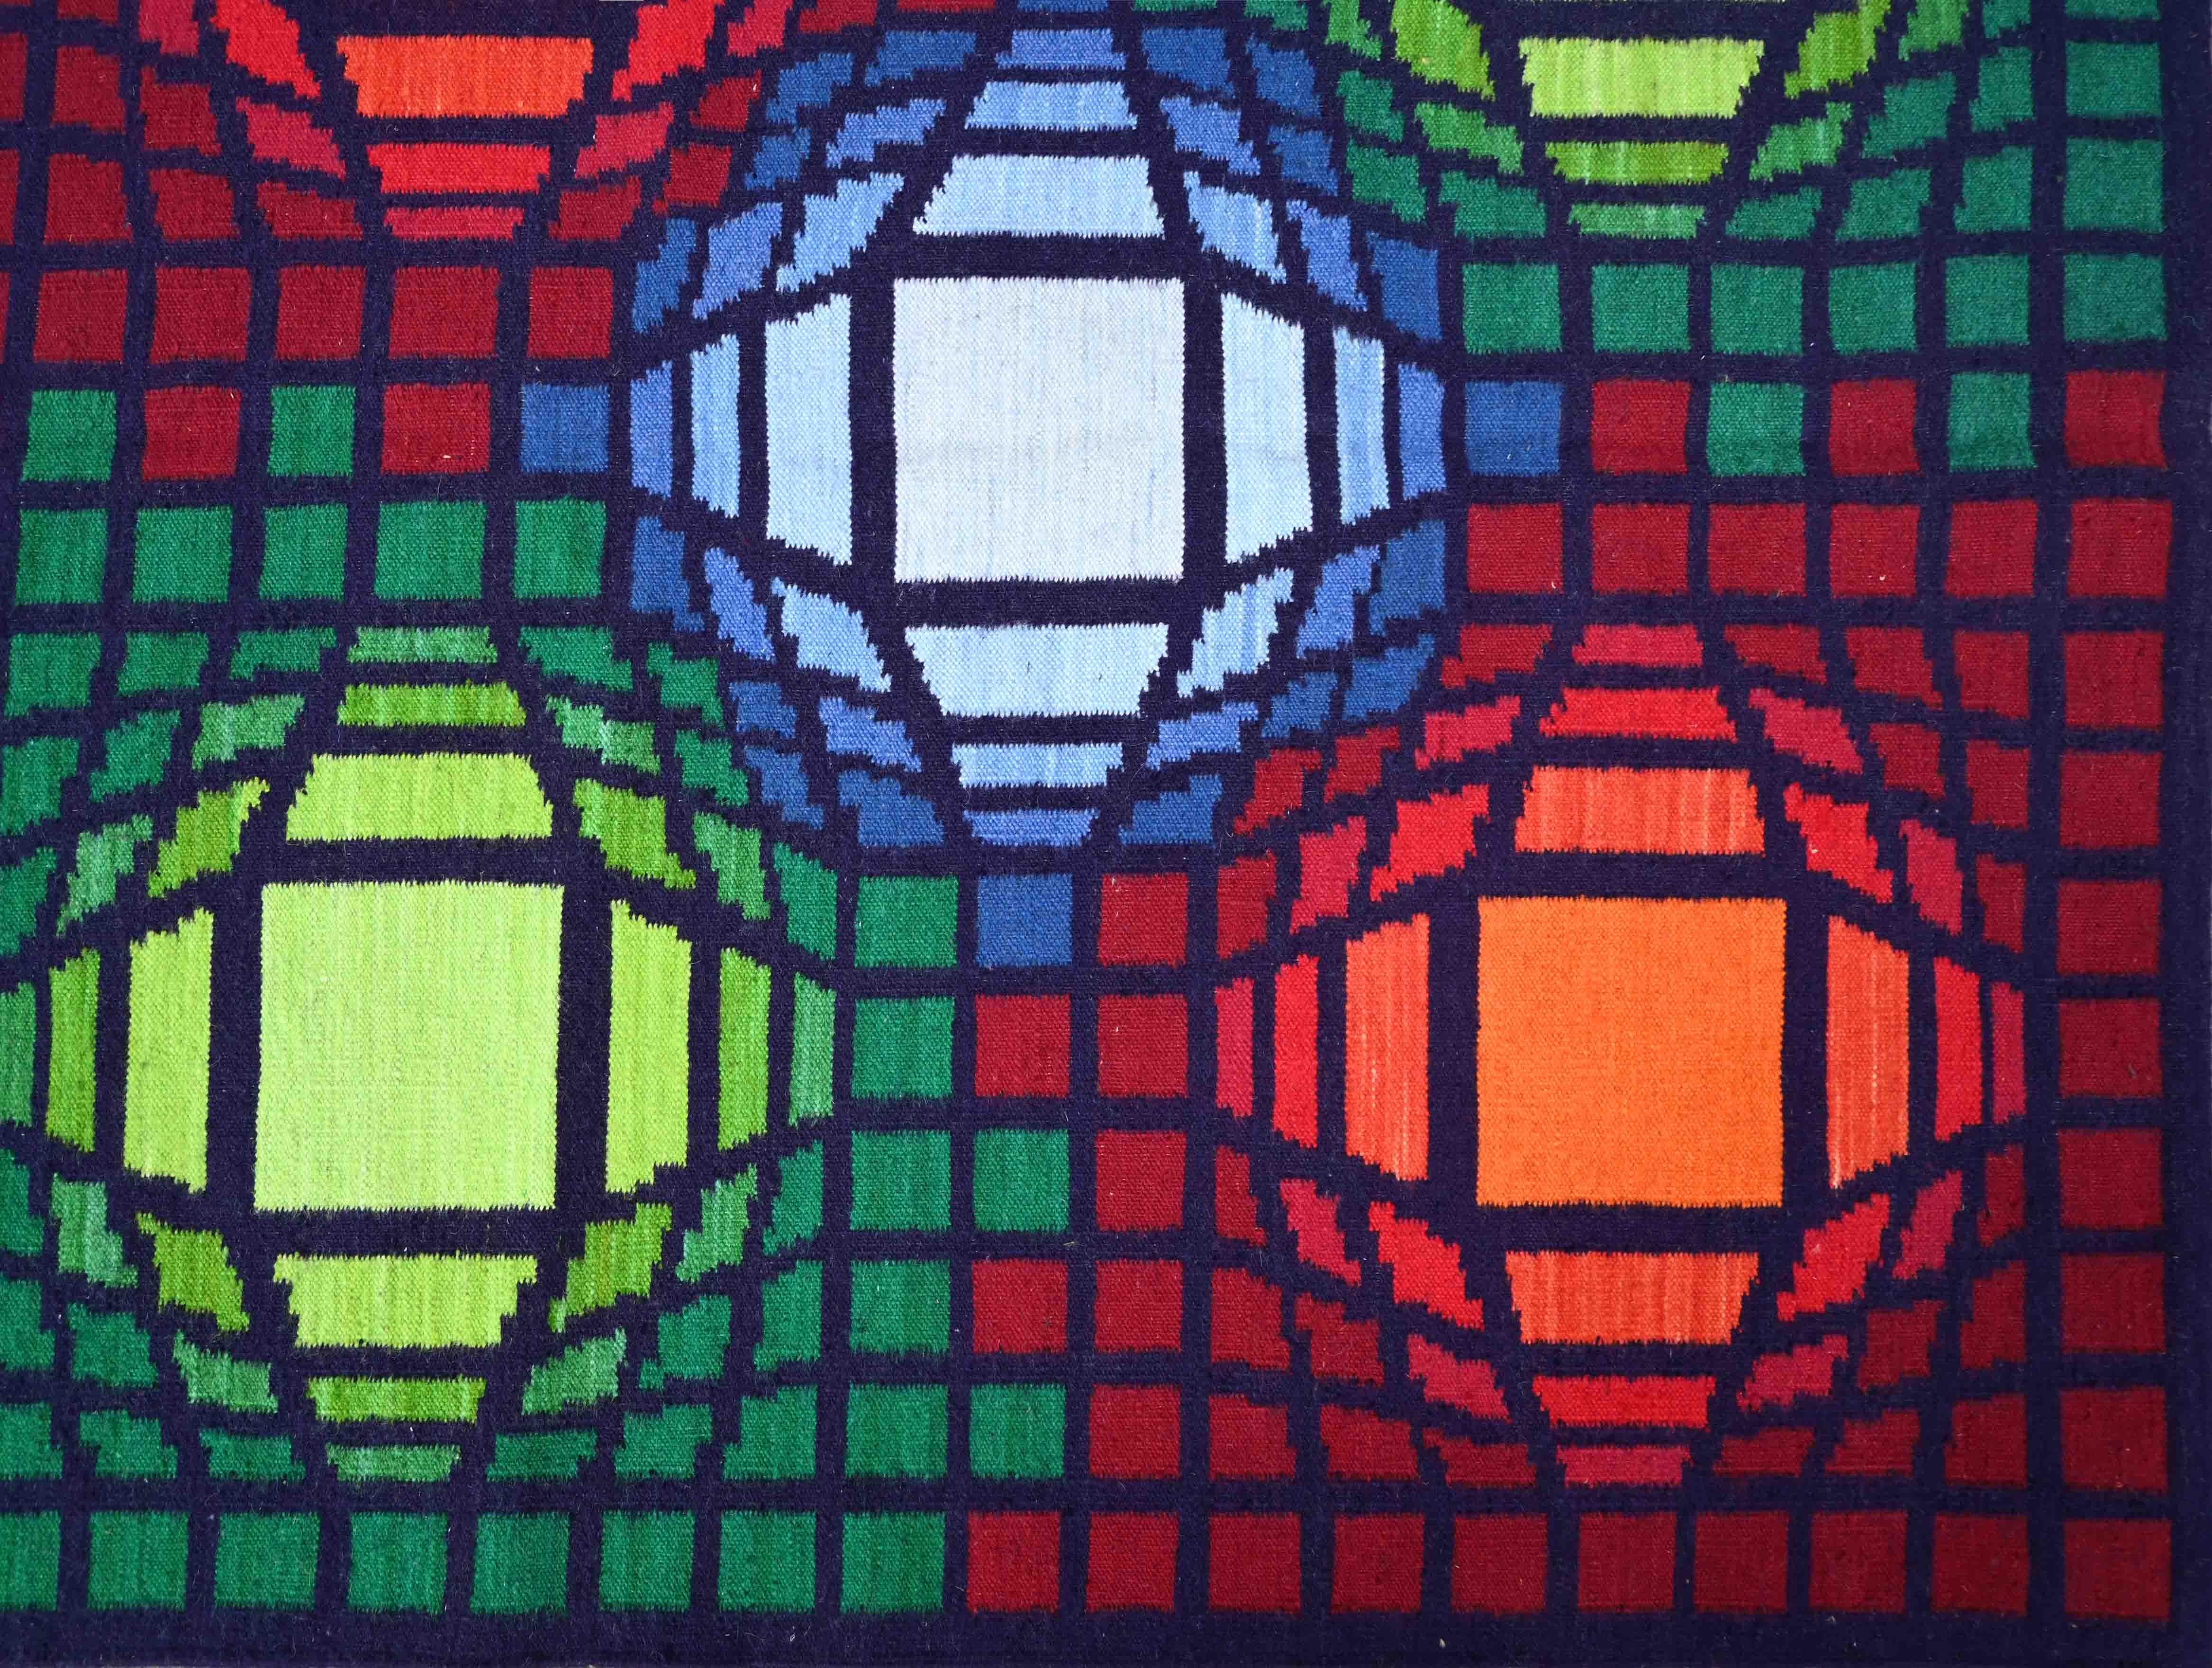 Aubusson Kinetic Tapestry LM1985 Signed Jakubczyk - In the style of Vasarely - No. 1377 For Sale